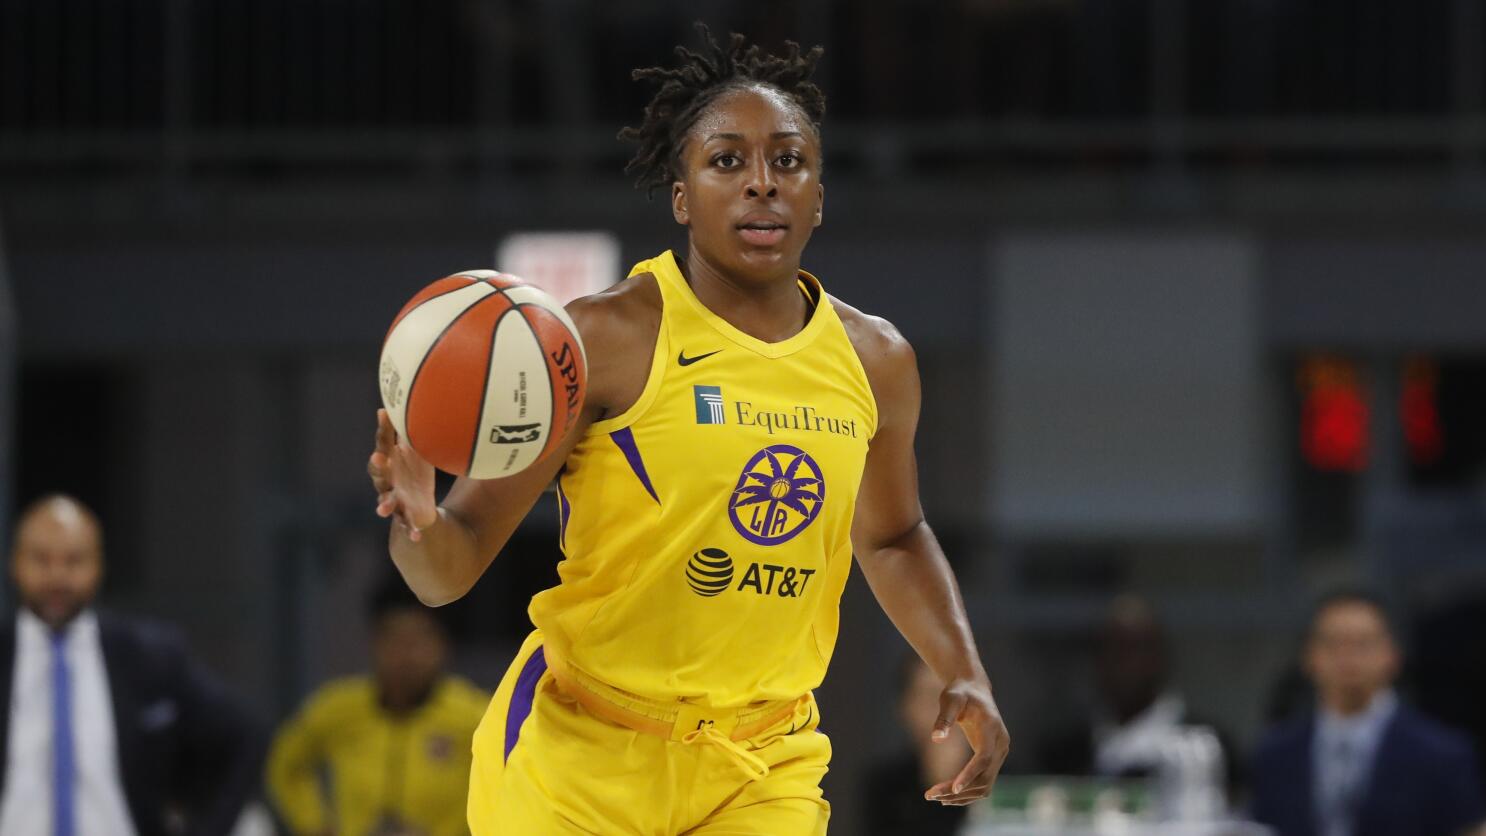 One-on-one with Sparks all-star Nneka Ogwumike